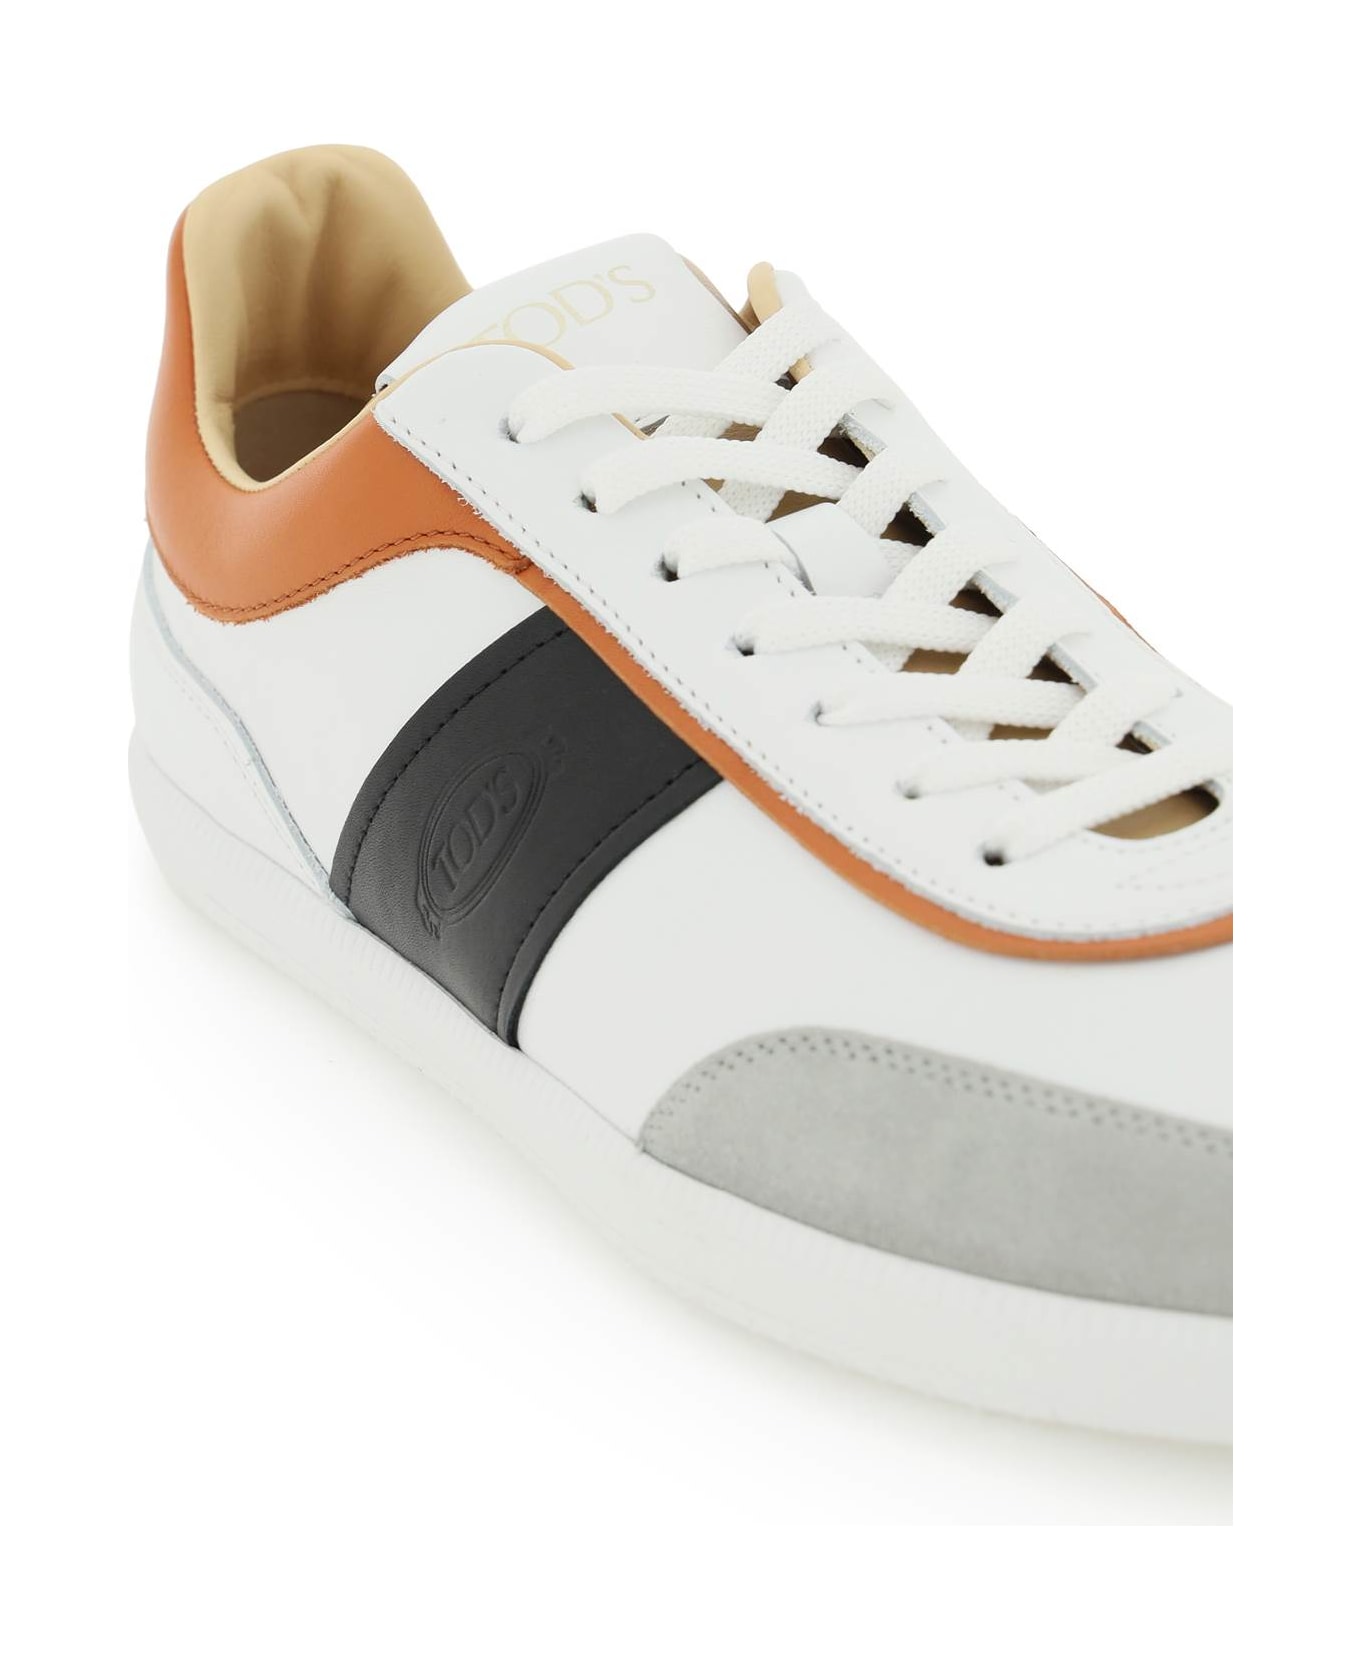 Tod's Low-top Sneakers From - GRIGIO MEDIO BIANCO G832 B999 C807 (White)